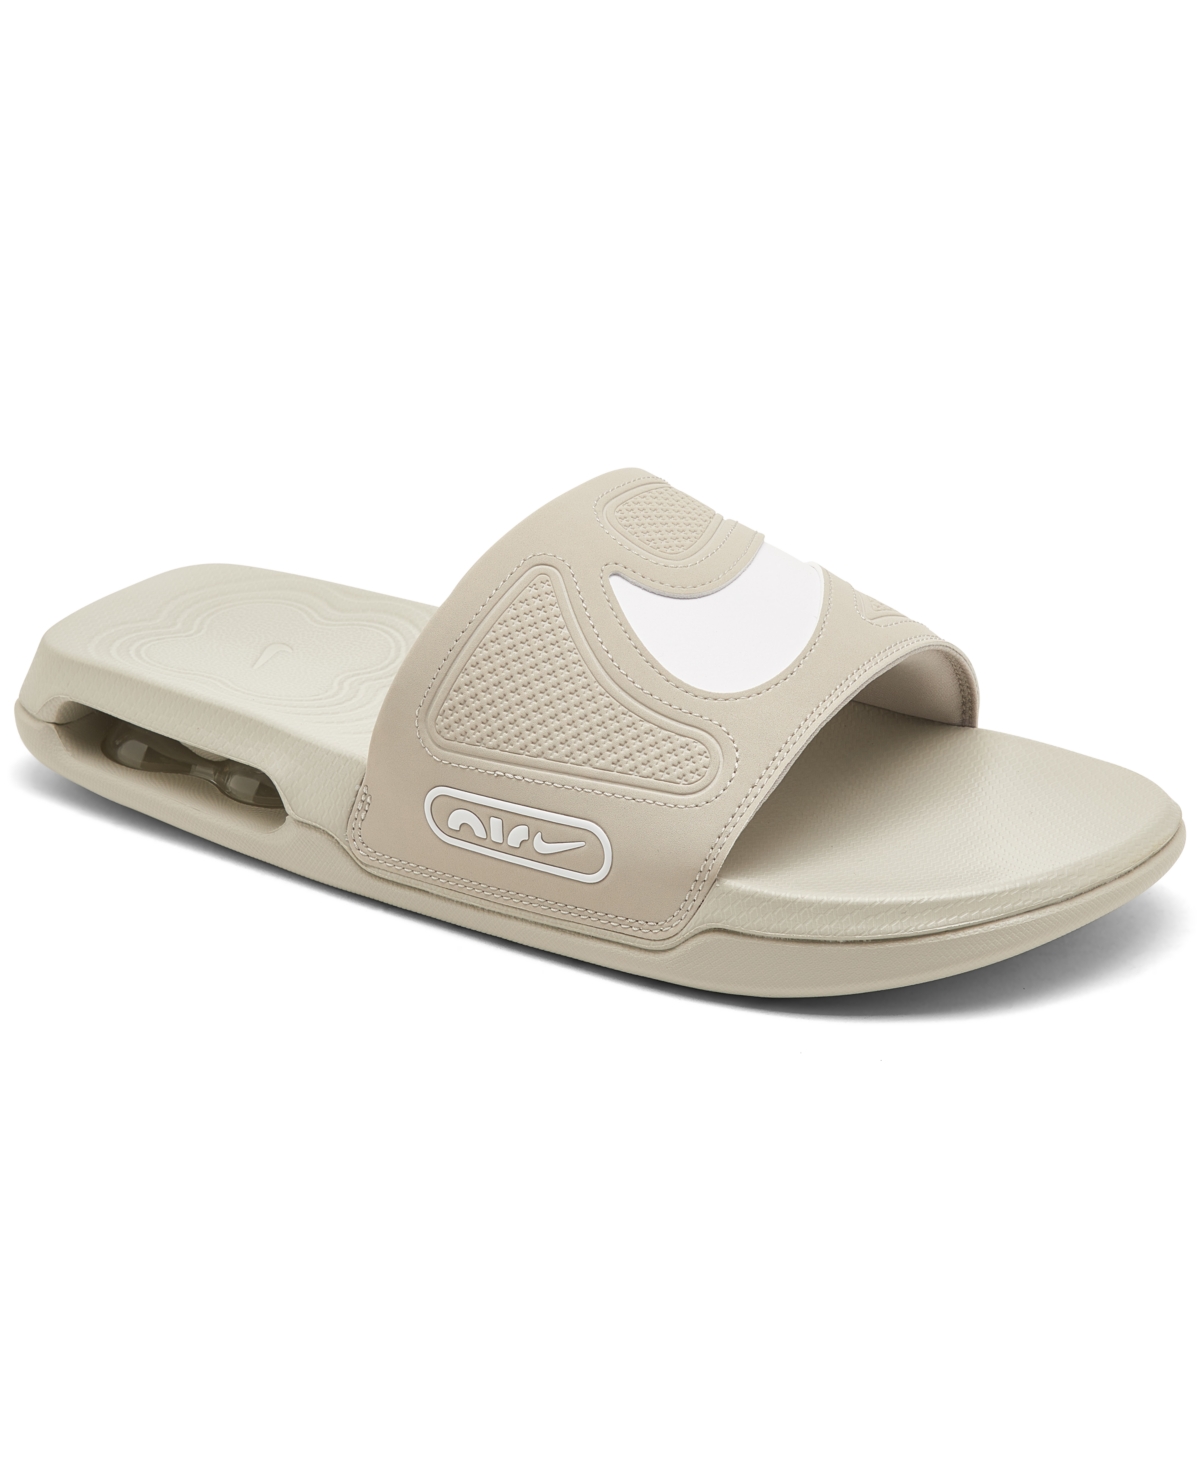 Nike Men's Air Max Cirro Slide Sandals From Finish Line In Light Iron Ore/white